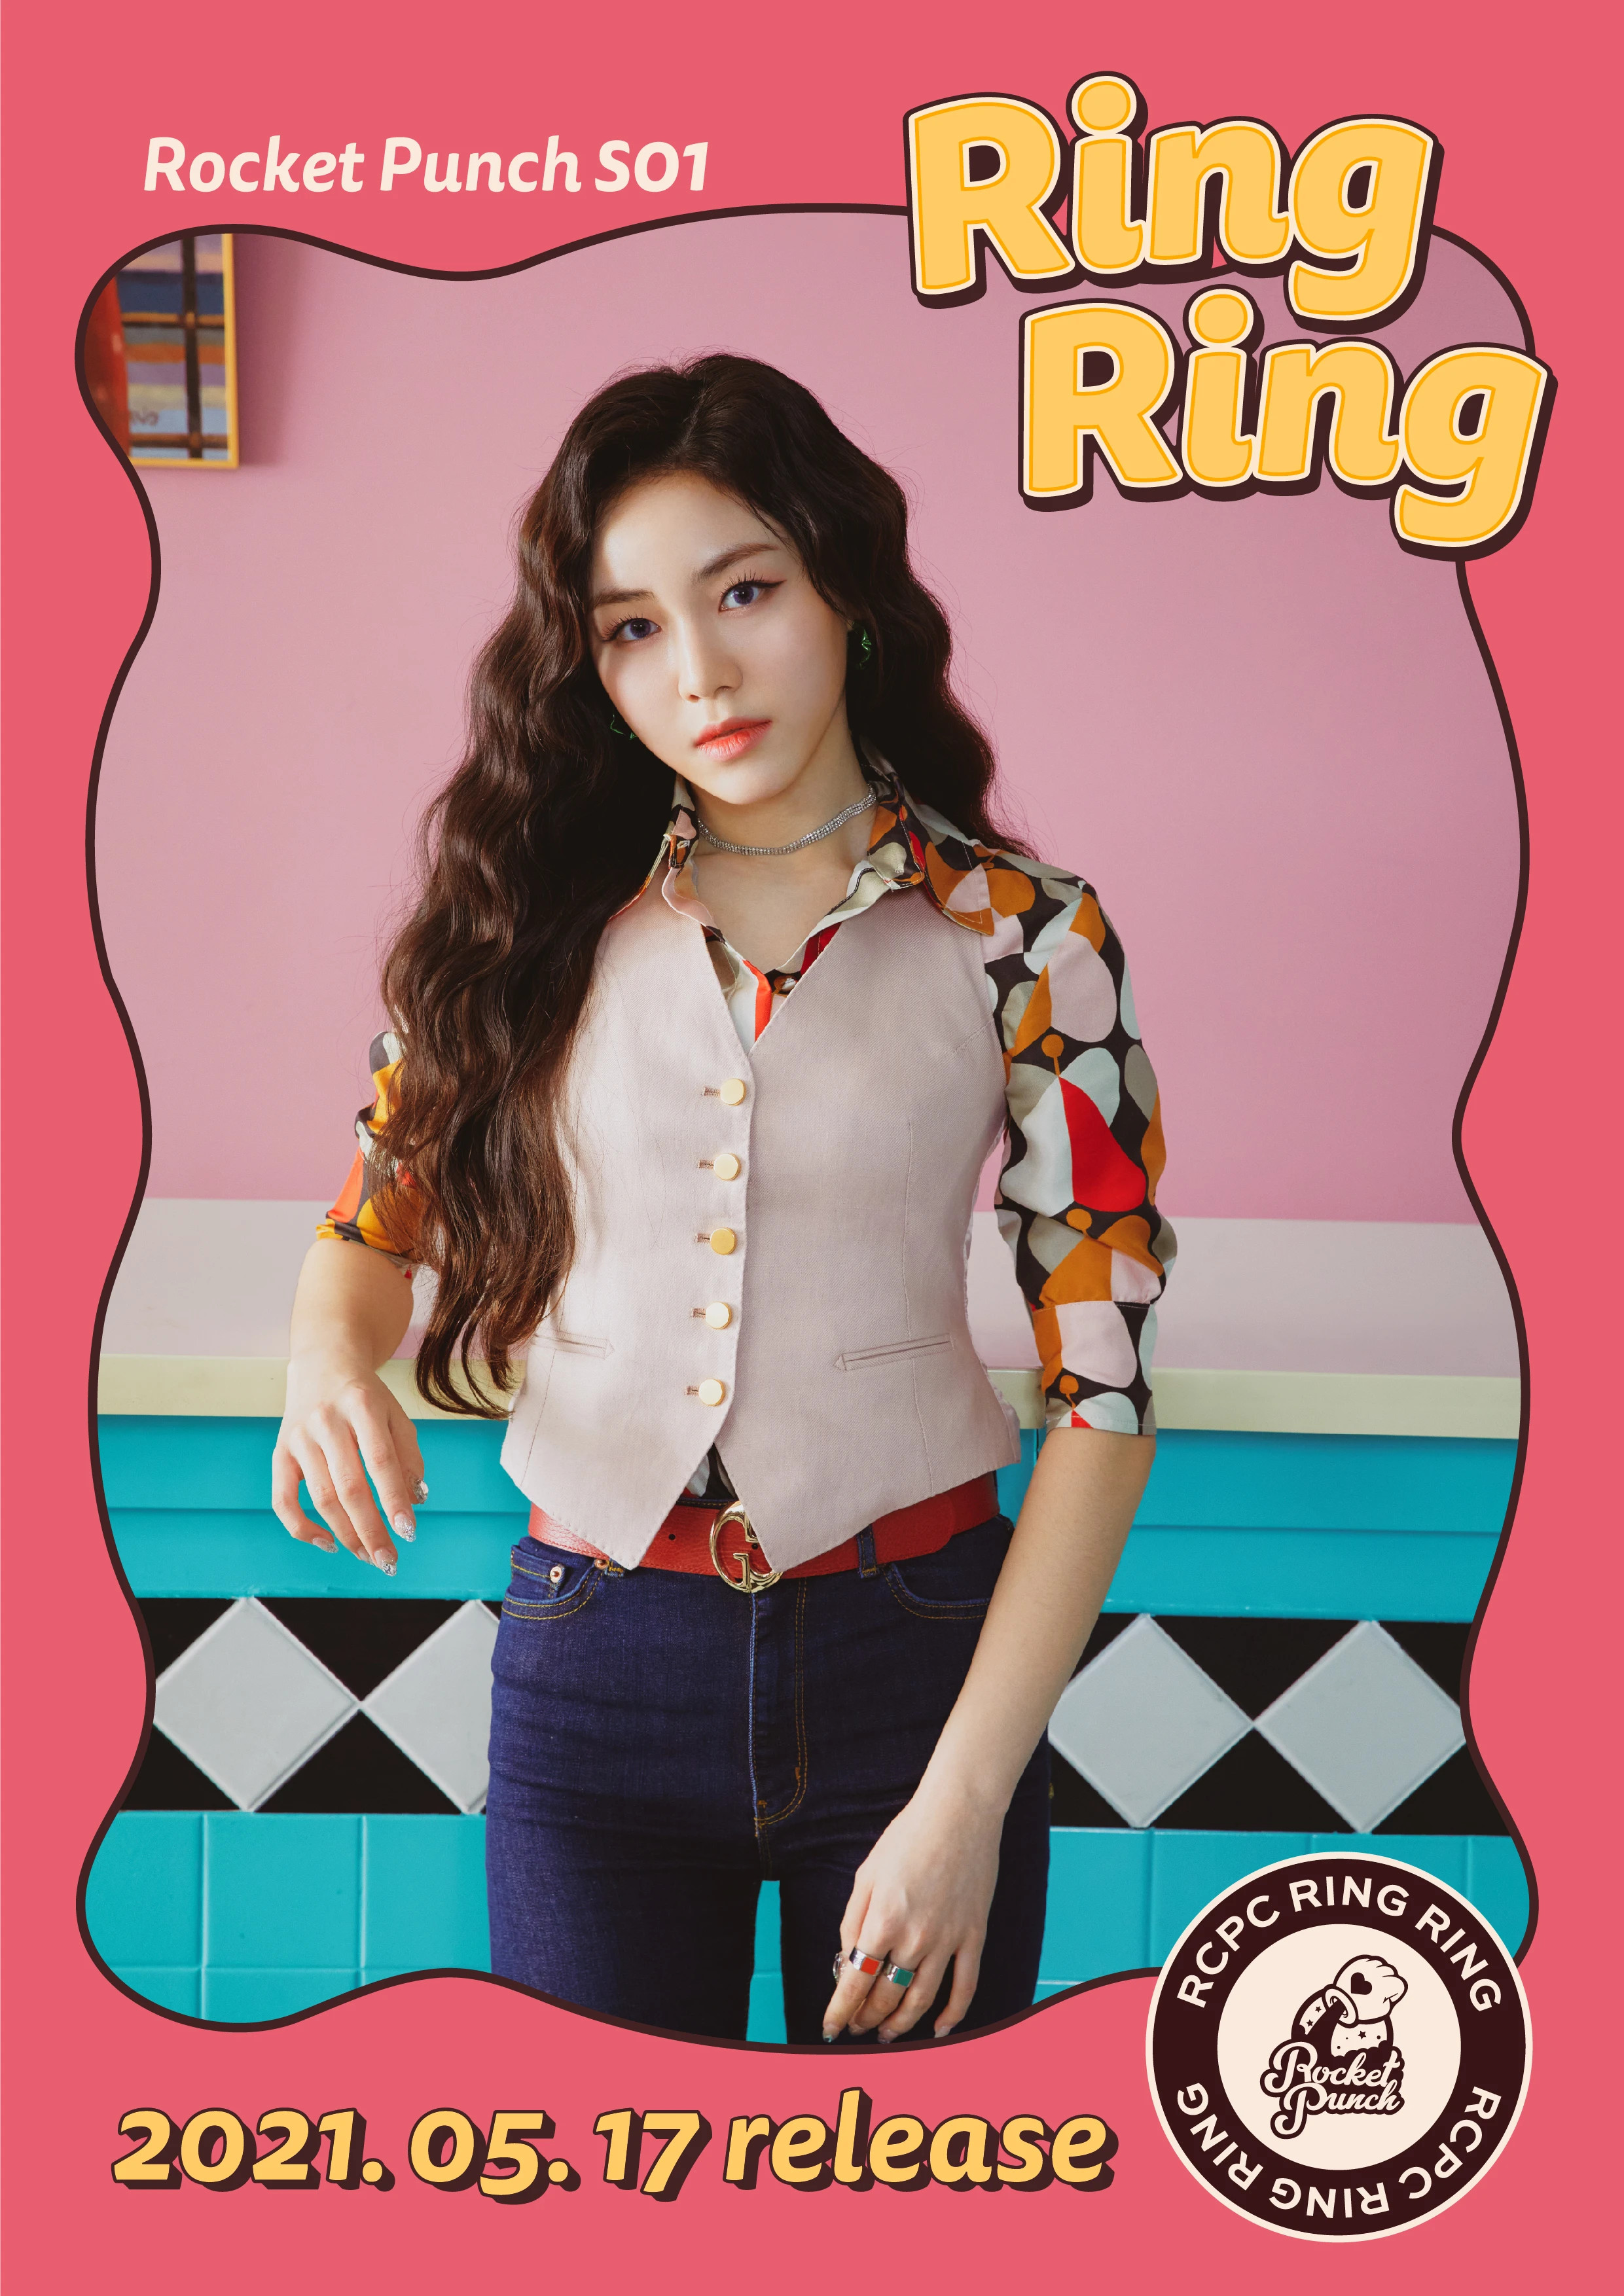 Rocket-Punch-Ring-Ring-1st-Single-Album-teasers-documents-3.jpeg